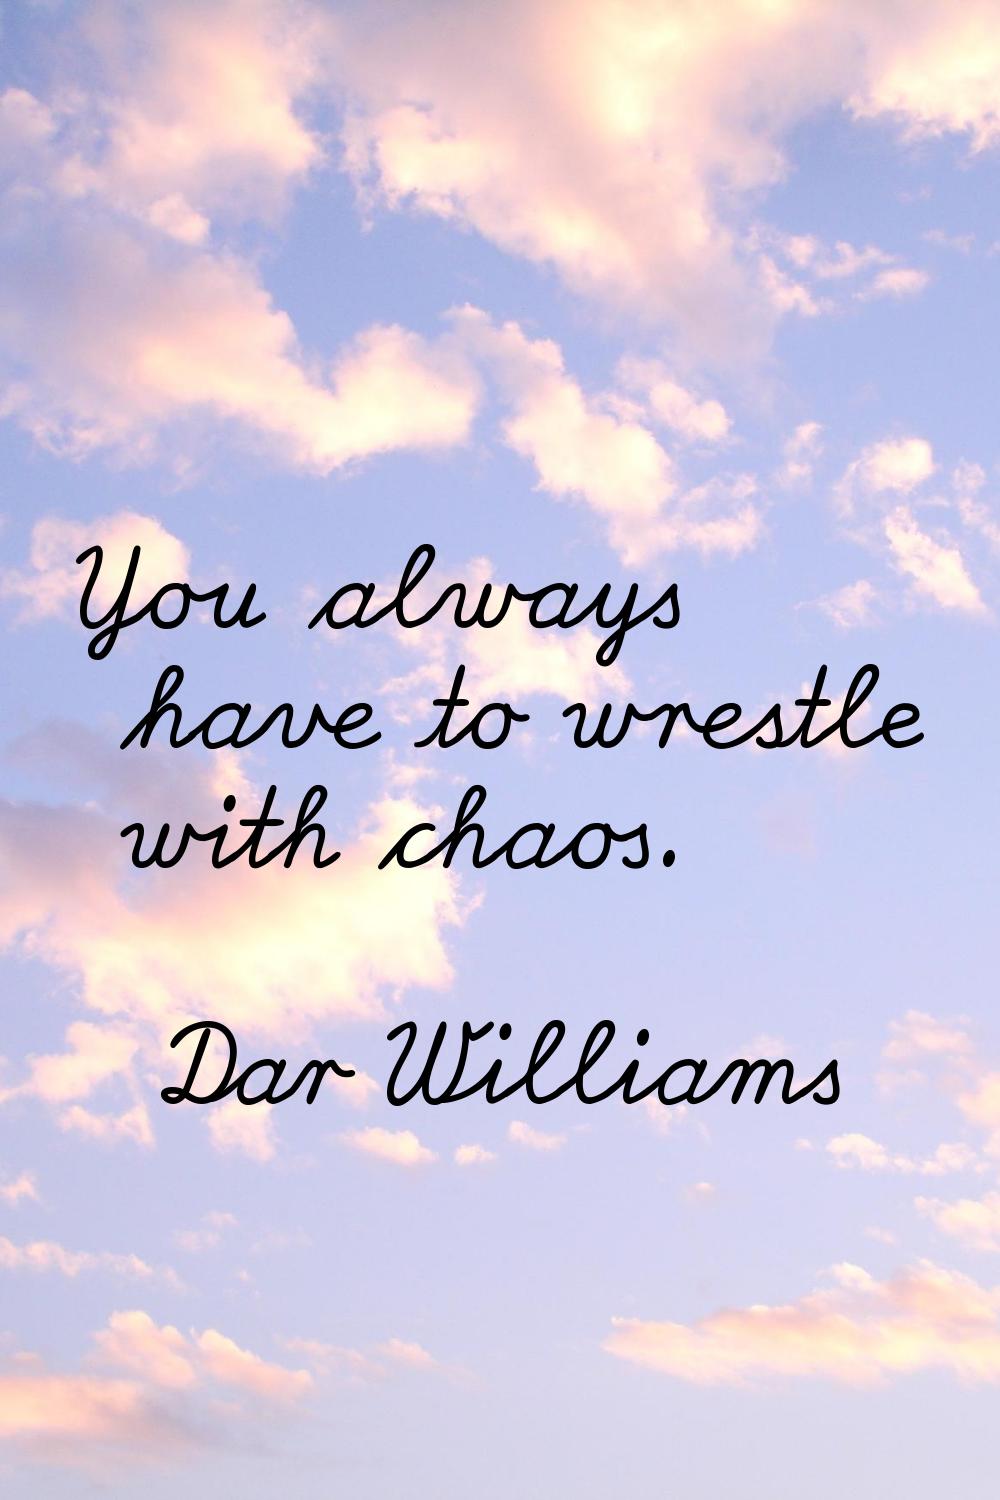 You always have to wrestle with chaos.